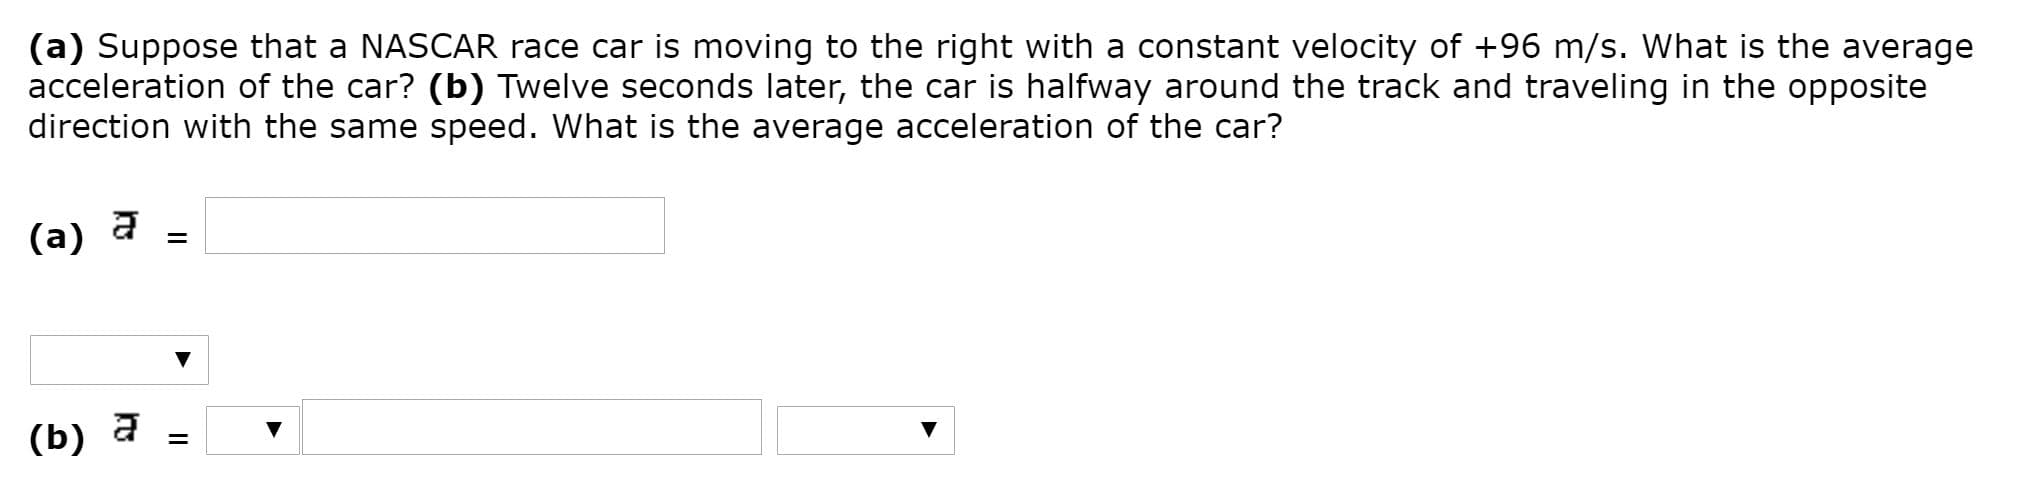 (a) Suppose that a NASCAR race car is moving to the right with a constant velocity of +96 m/s. What is the average
acceleration of the car? (b) Twelve seconds later, the car is halfway around the track and traveling in the opposite
direction with the same speed. What is the average acceleration of the car?
(a)
(b) a
